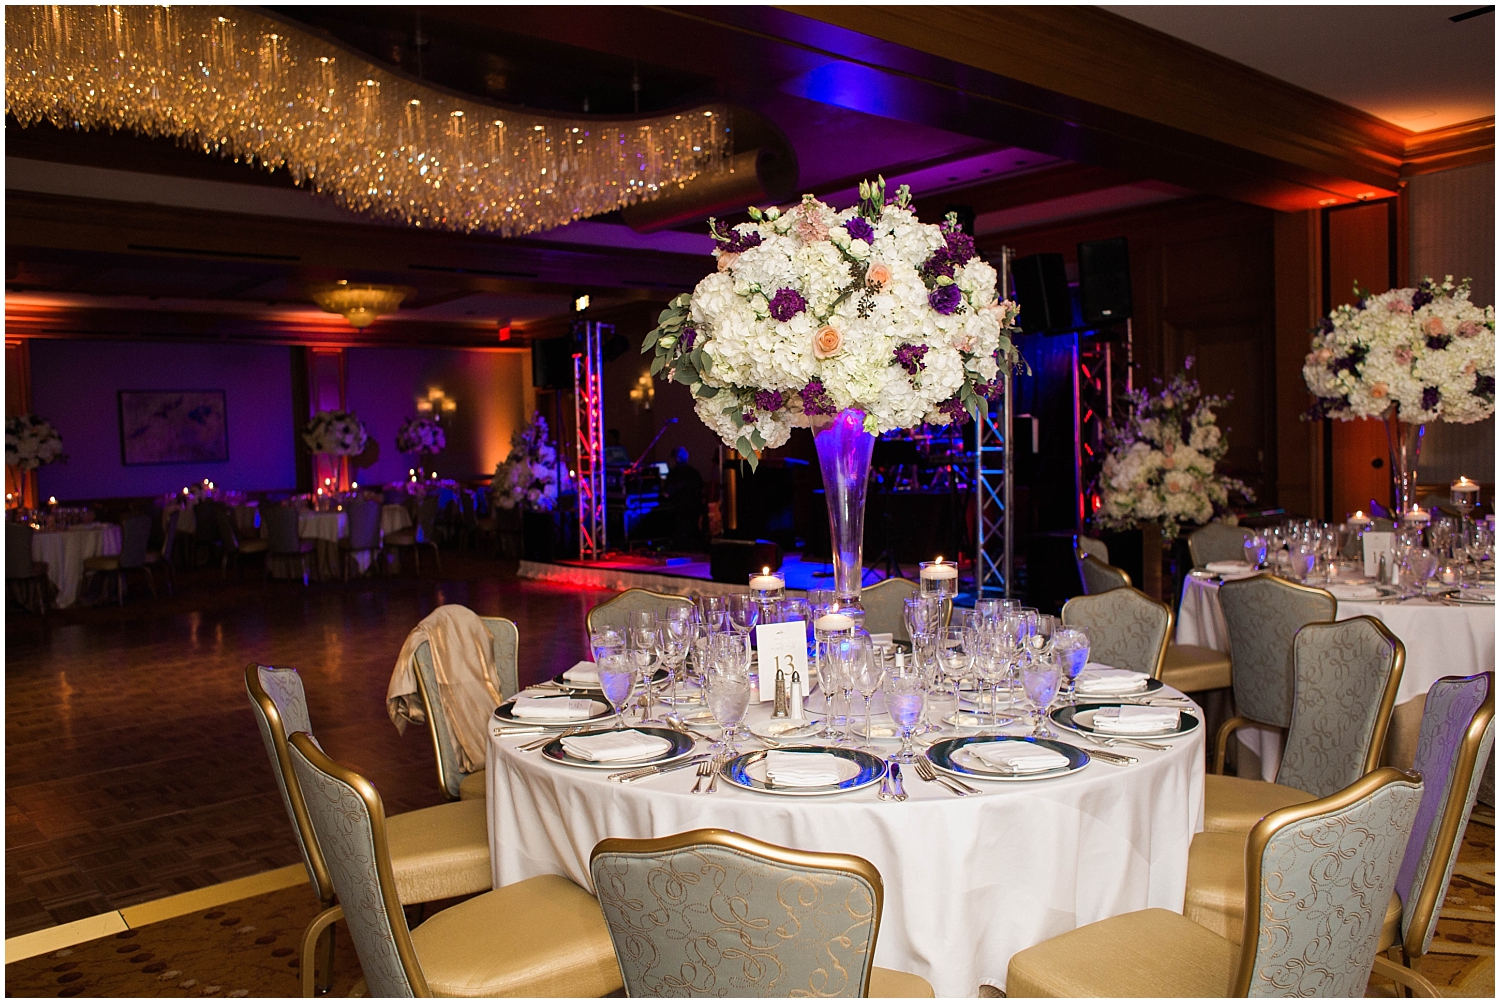  tall wedding centerpiece with purple and white flowers 